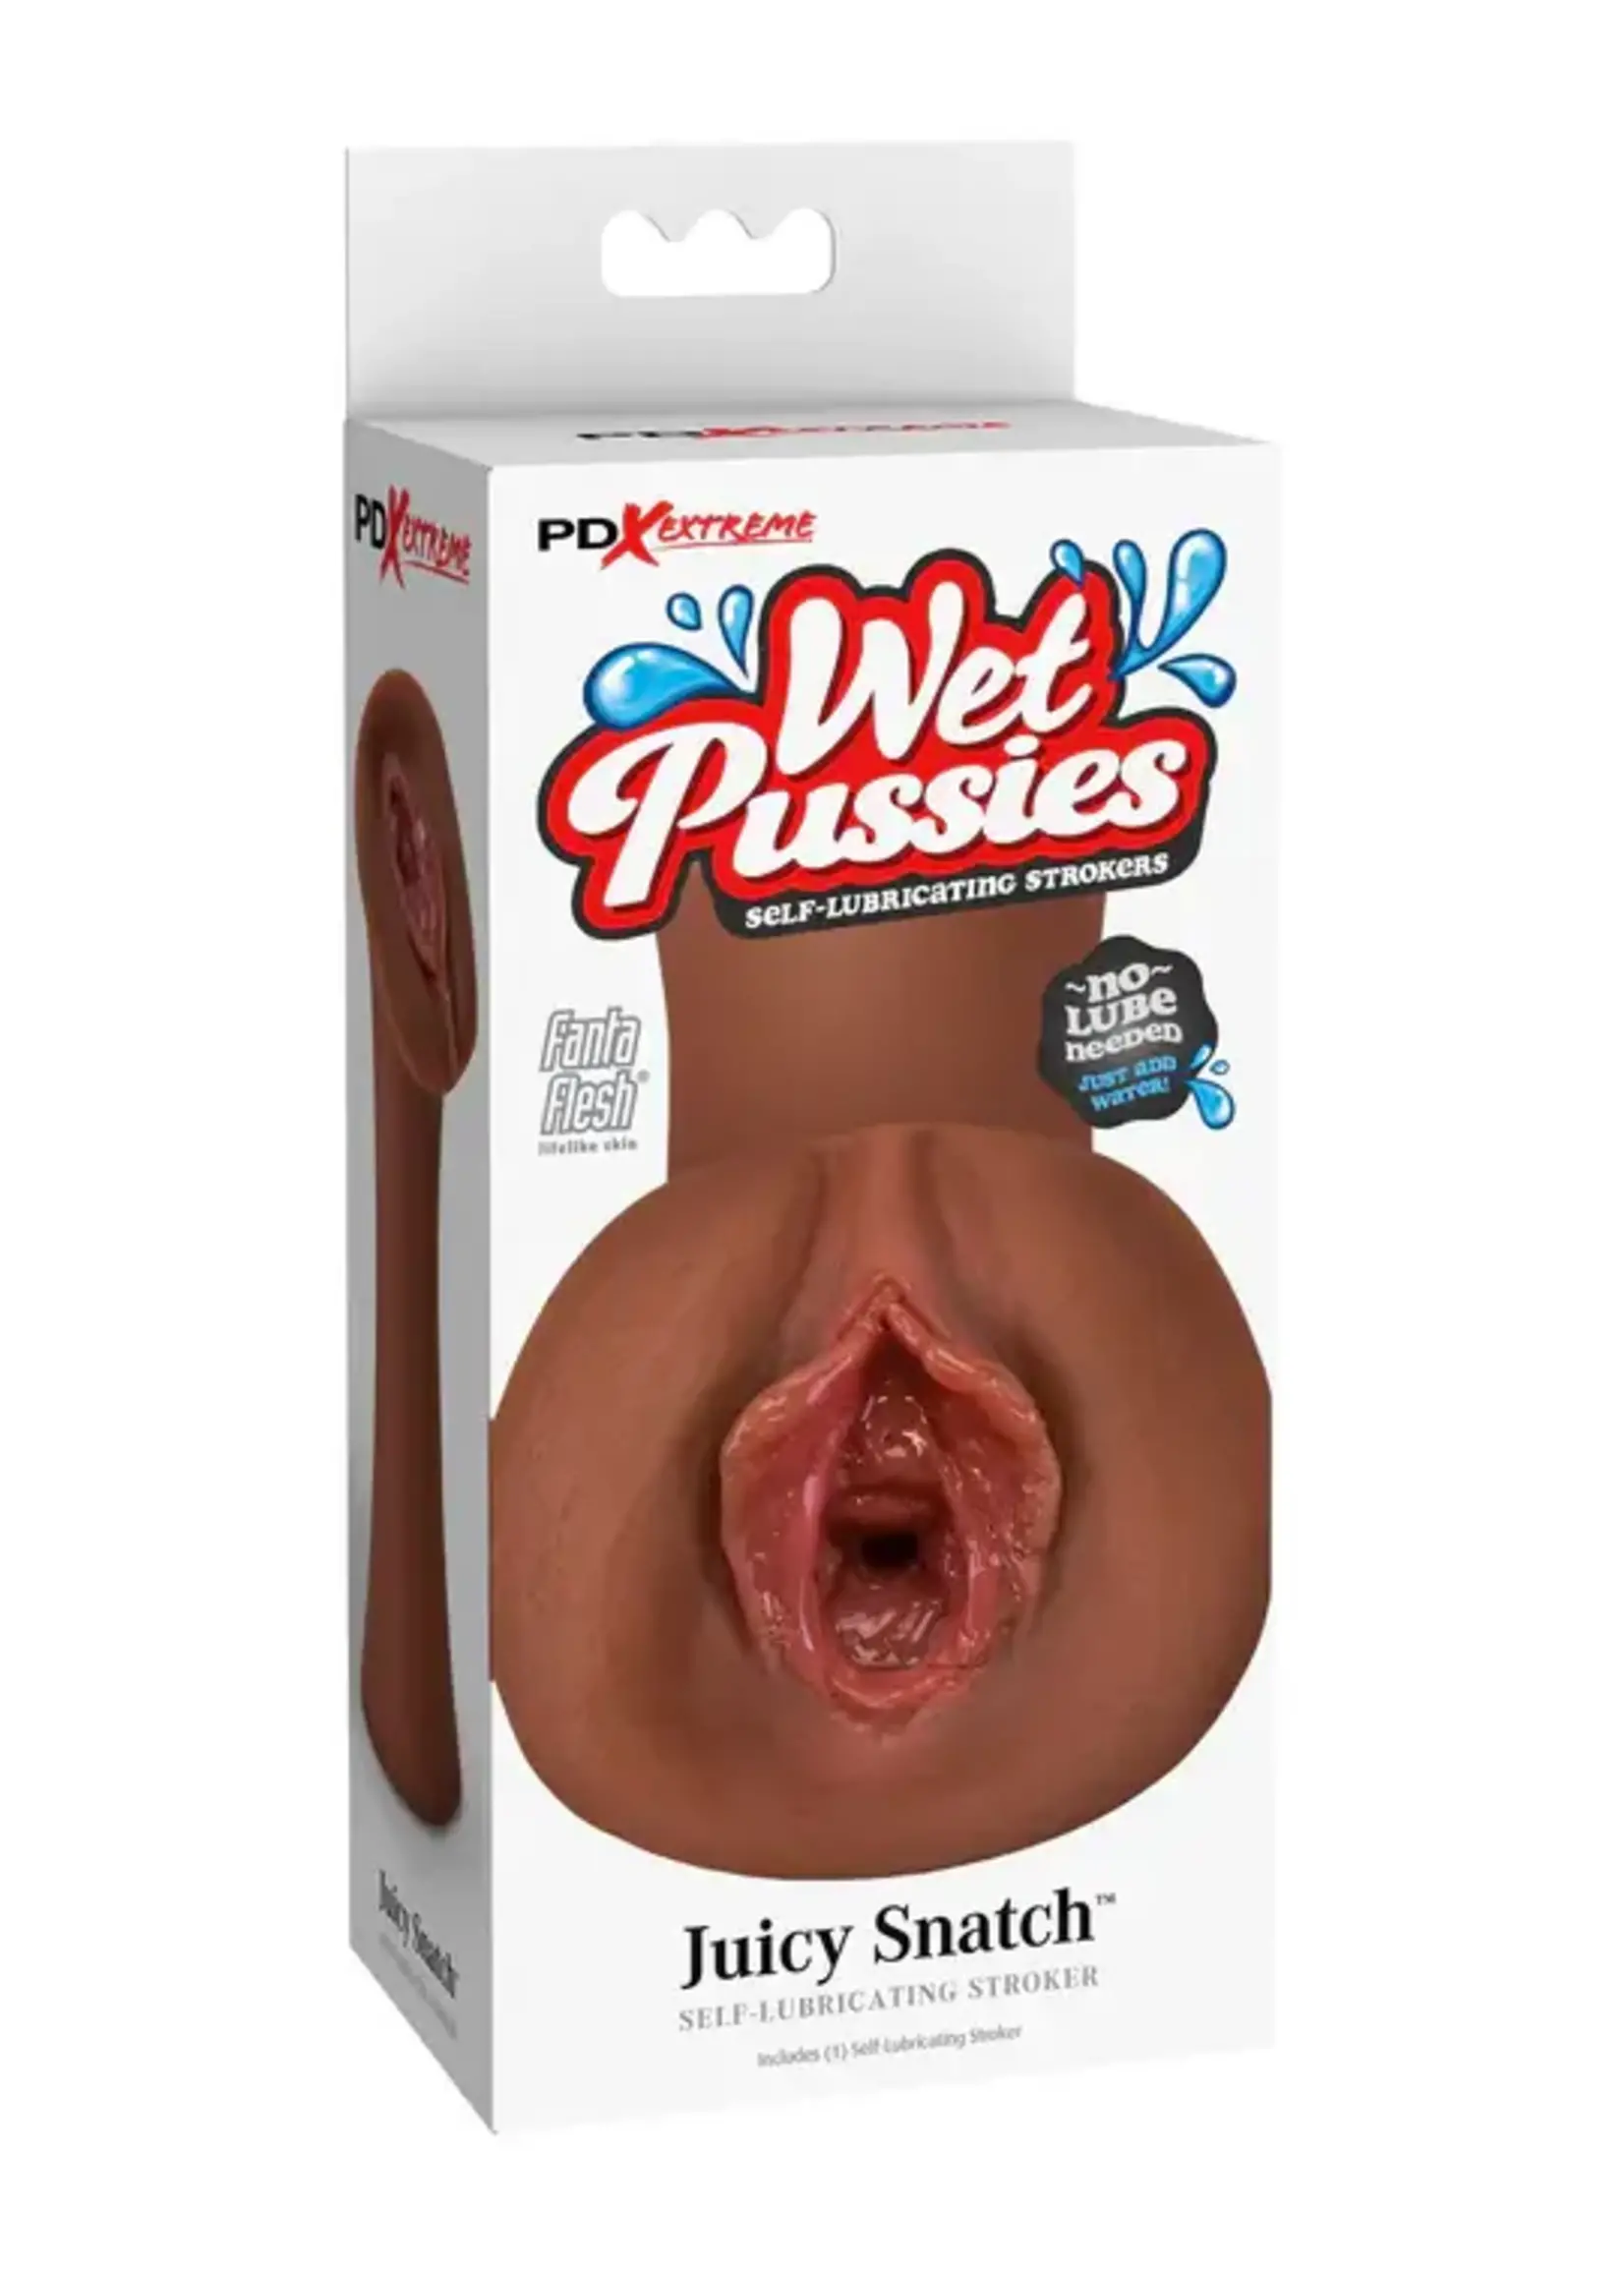 Pipedream PDX Extreme Wet Pussies - Juicy Snatch